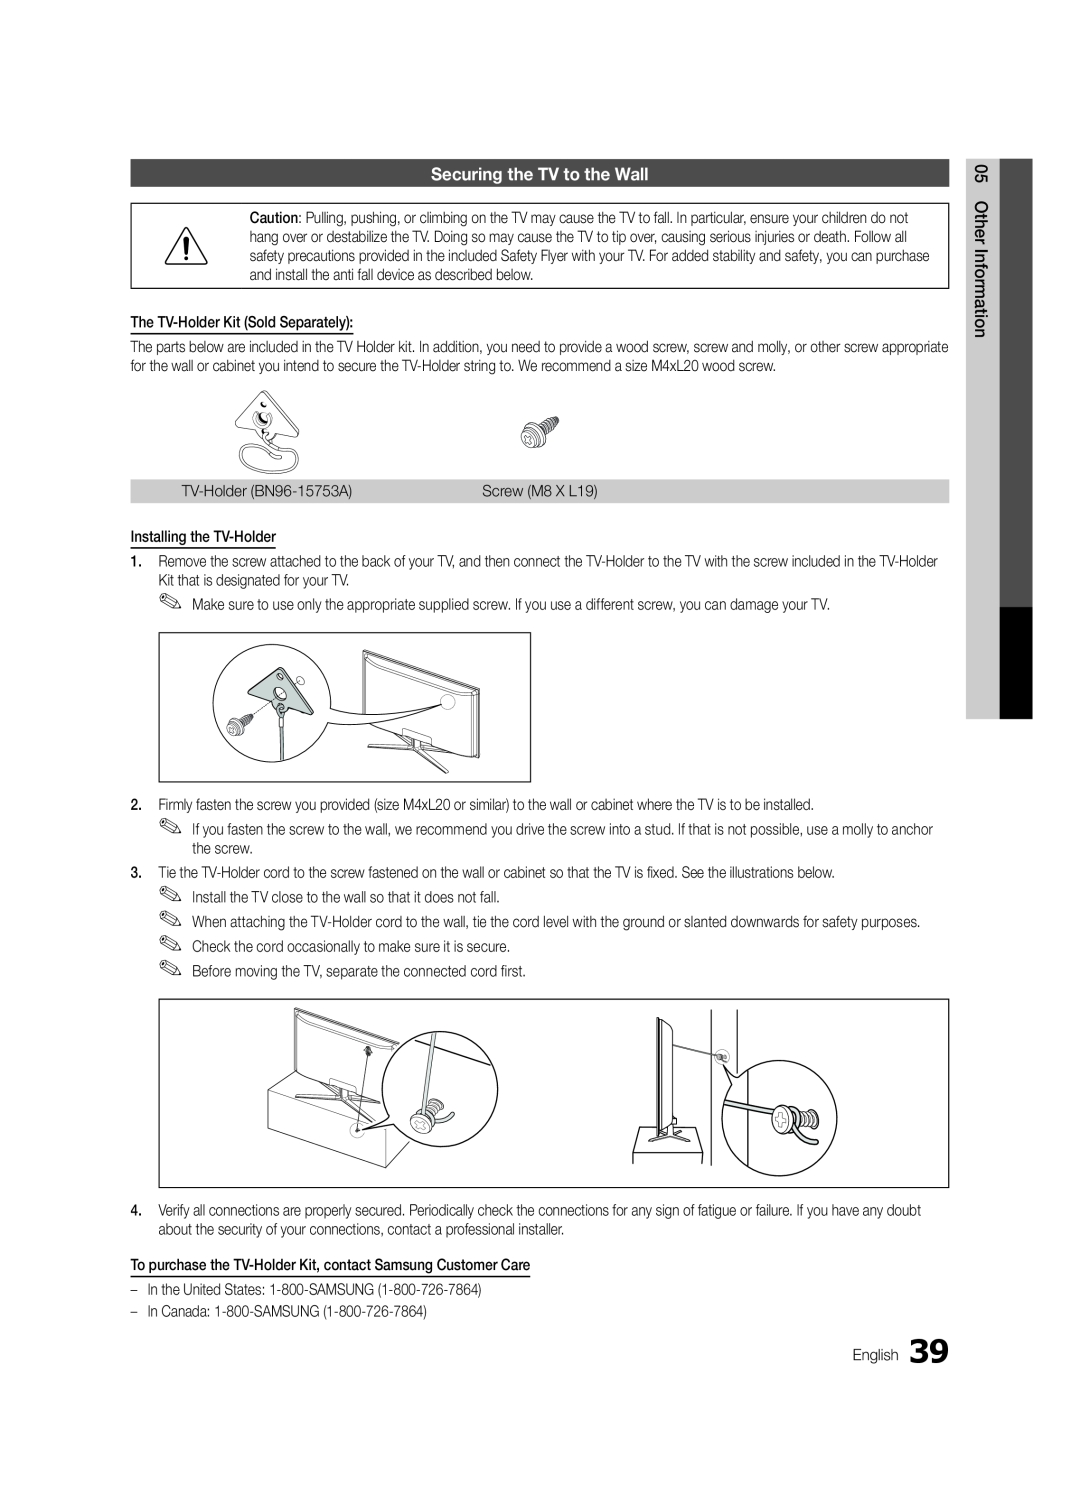 Samsung PC490-ZA, BN68-03114A-01 user manual Securing the TV to the Wall 